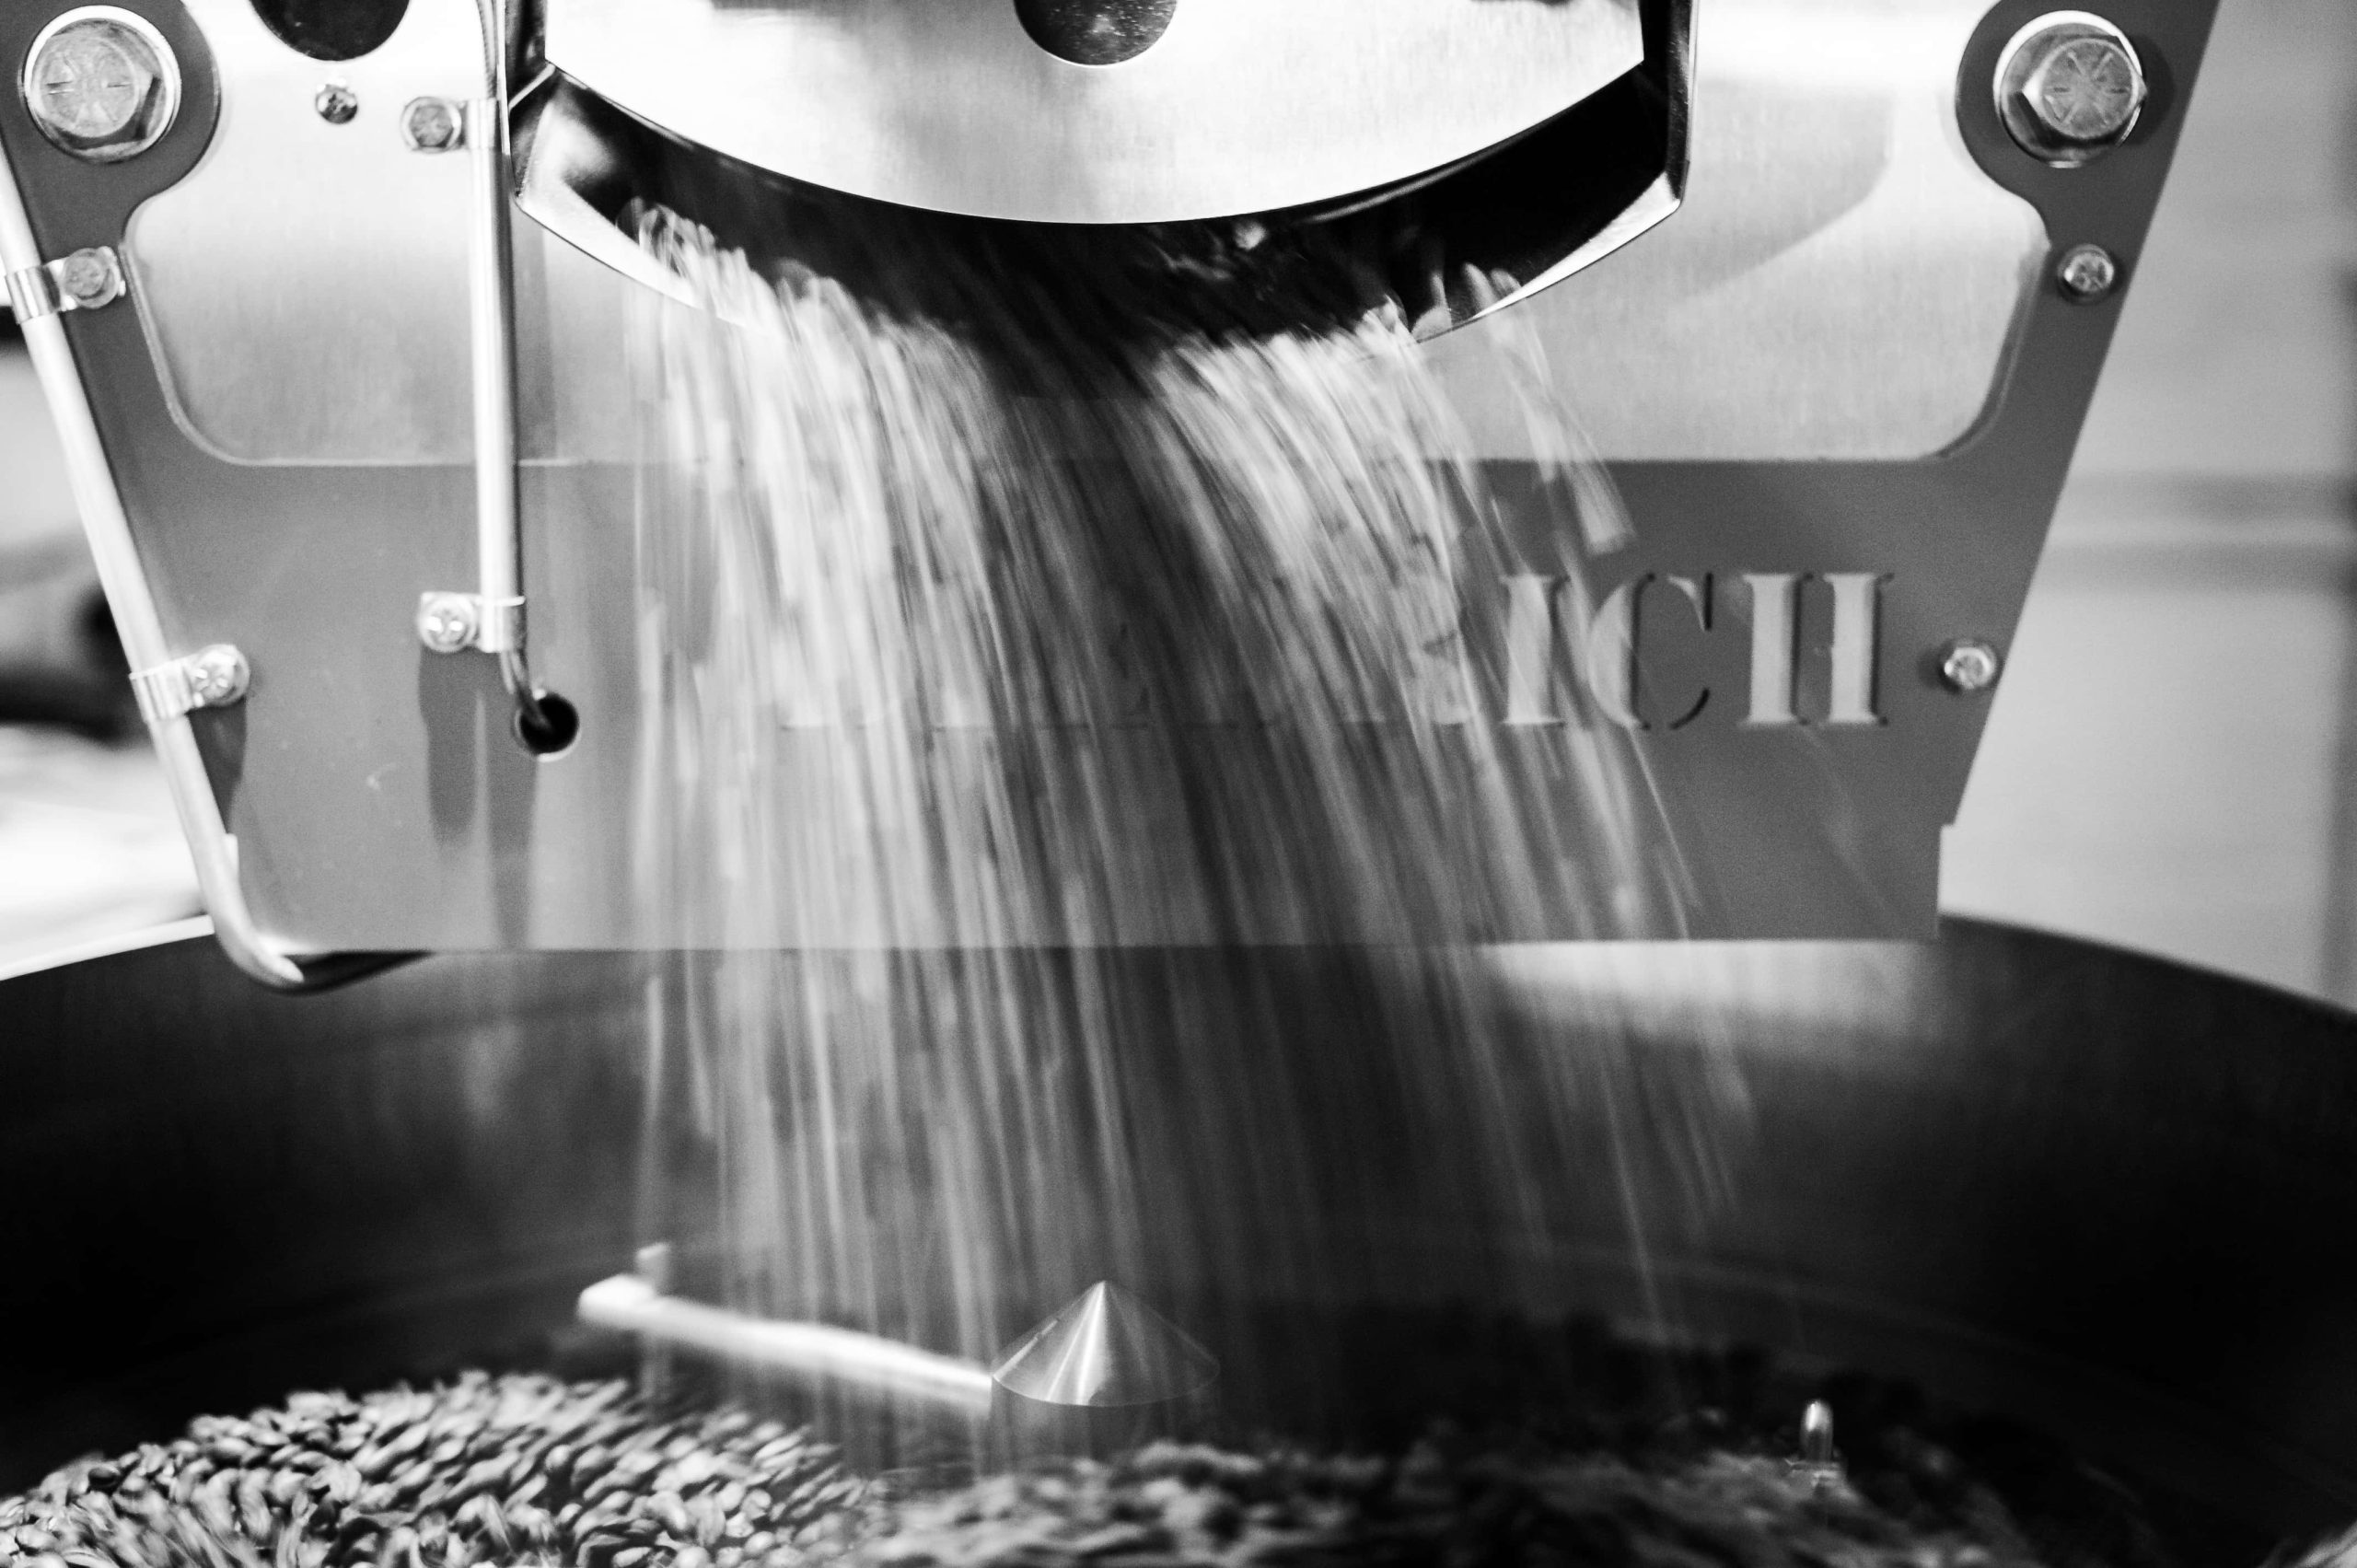 Coffee being poured from a roaster drum